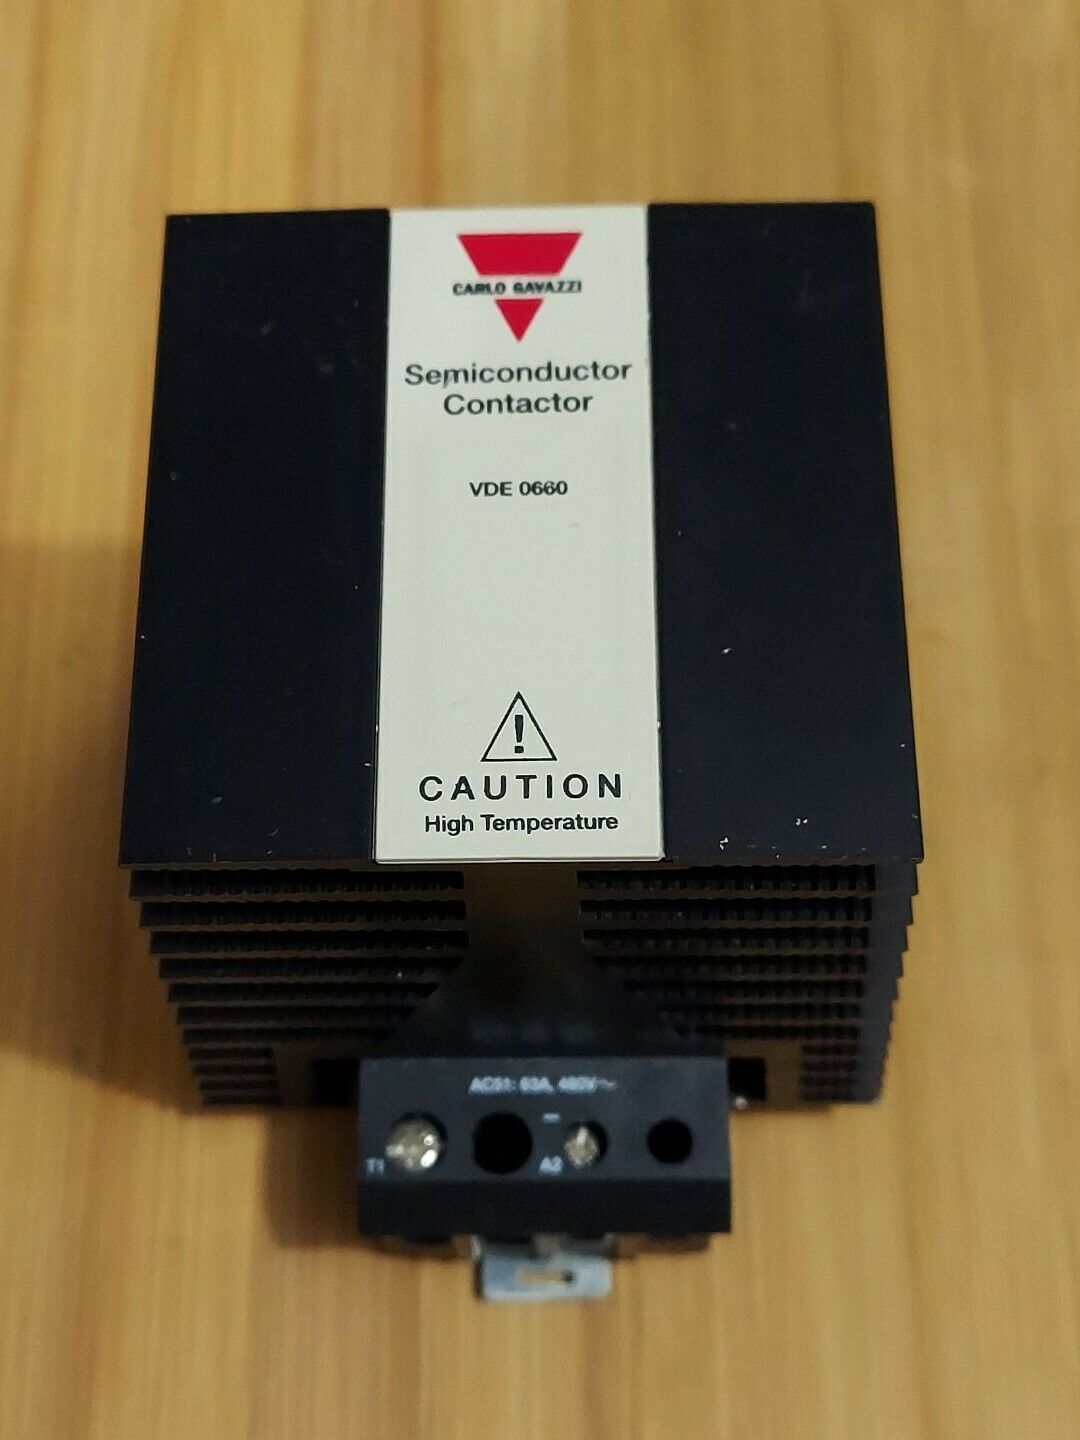 Carlo Gavazzi RN1A48D63 Solid State Relay 5 to 32 VDC AC51:63A, 480VAC (GR127)